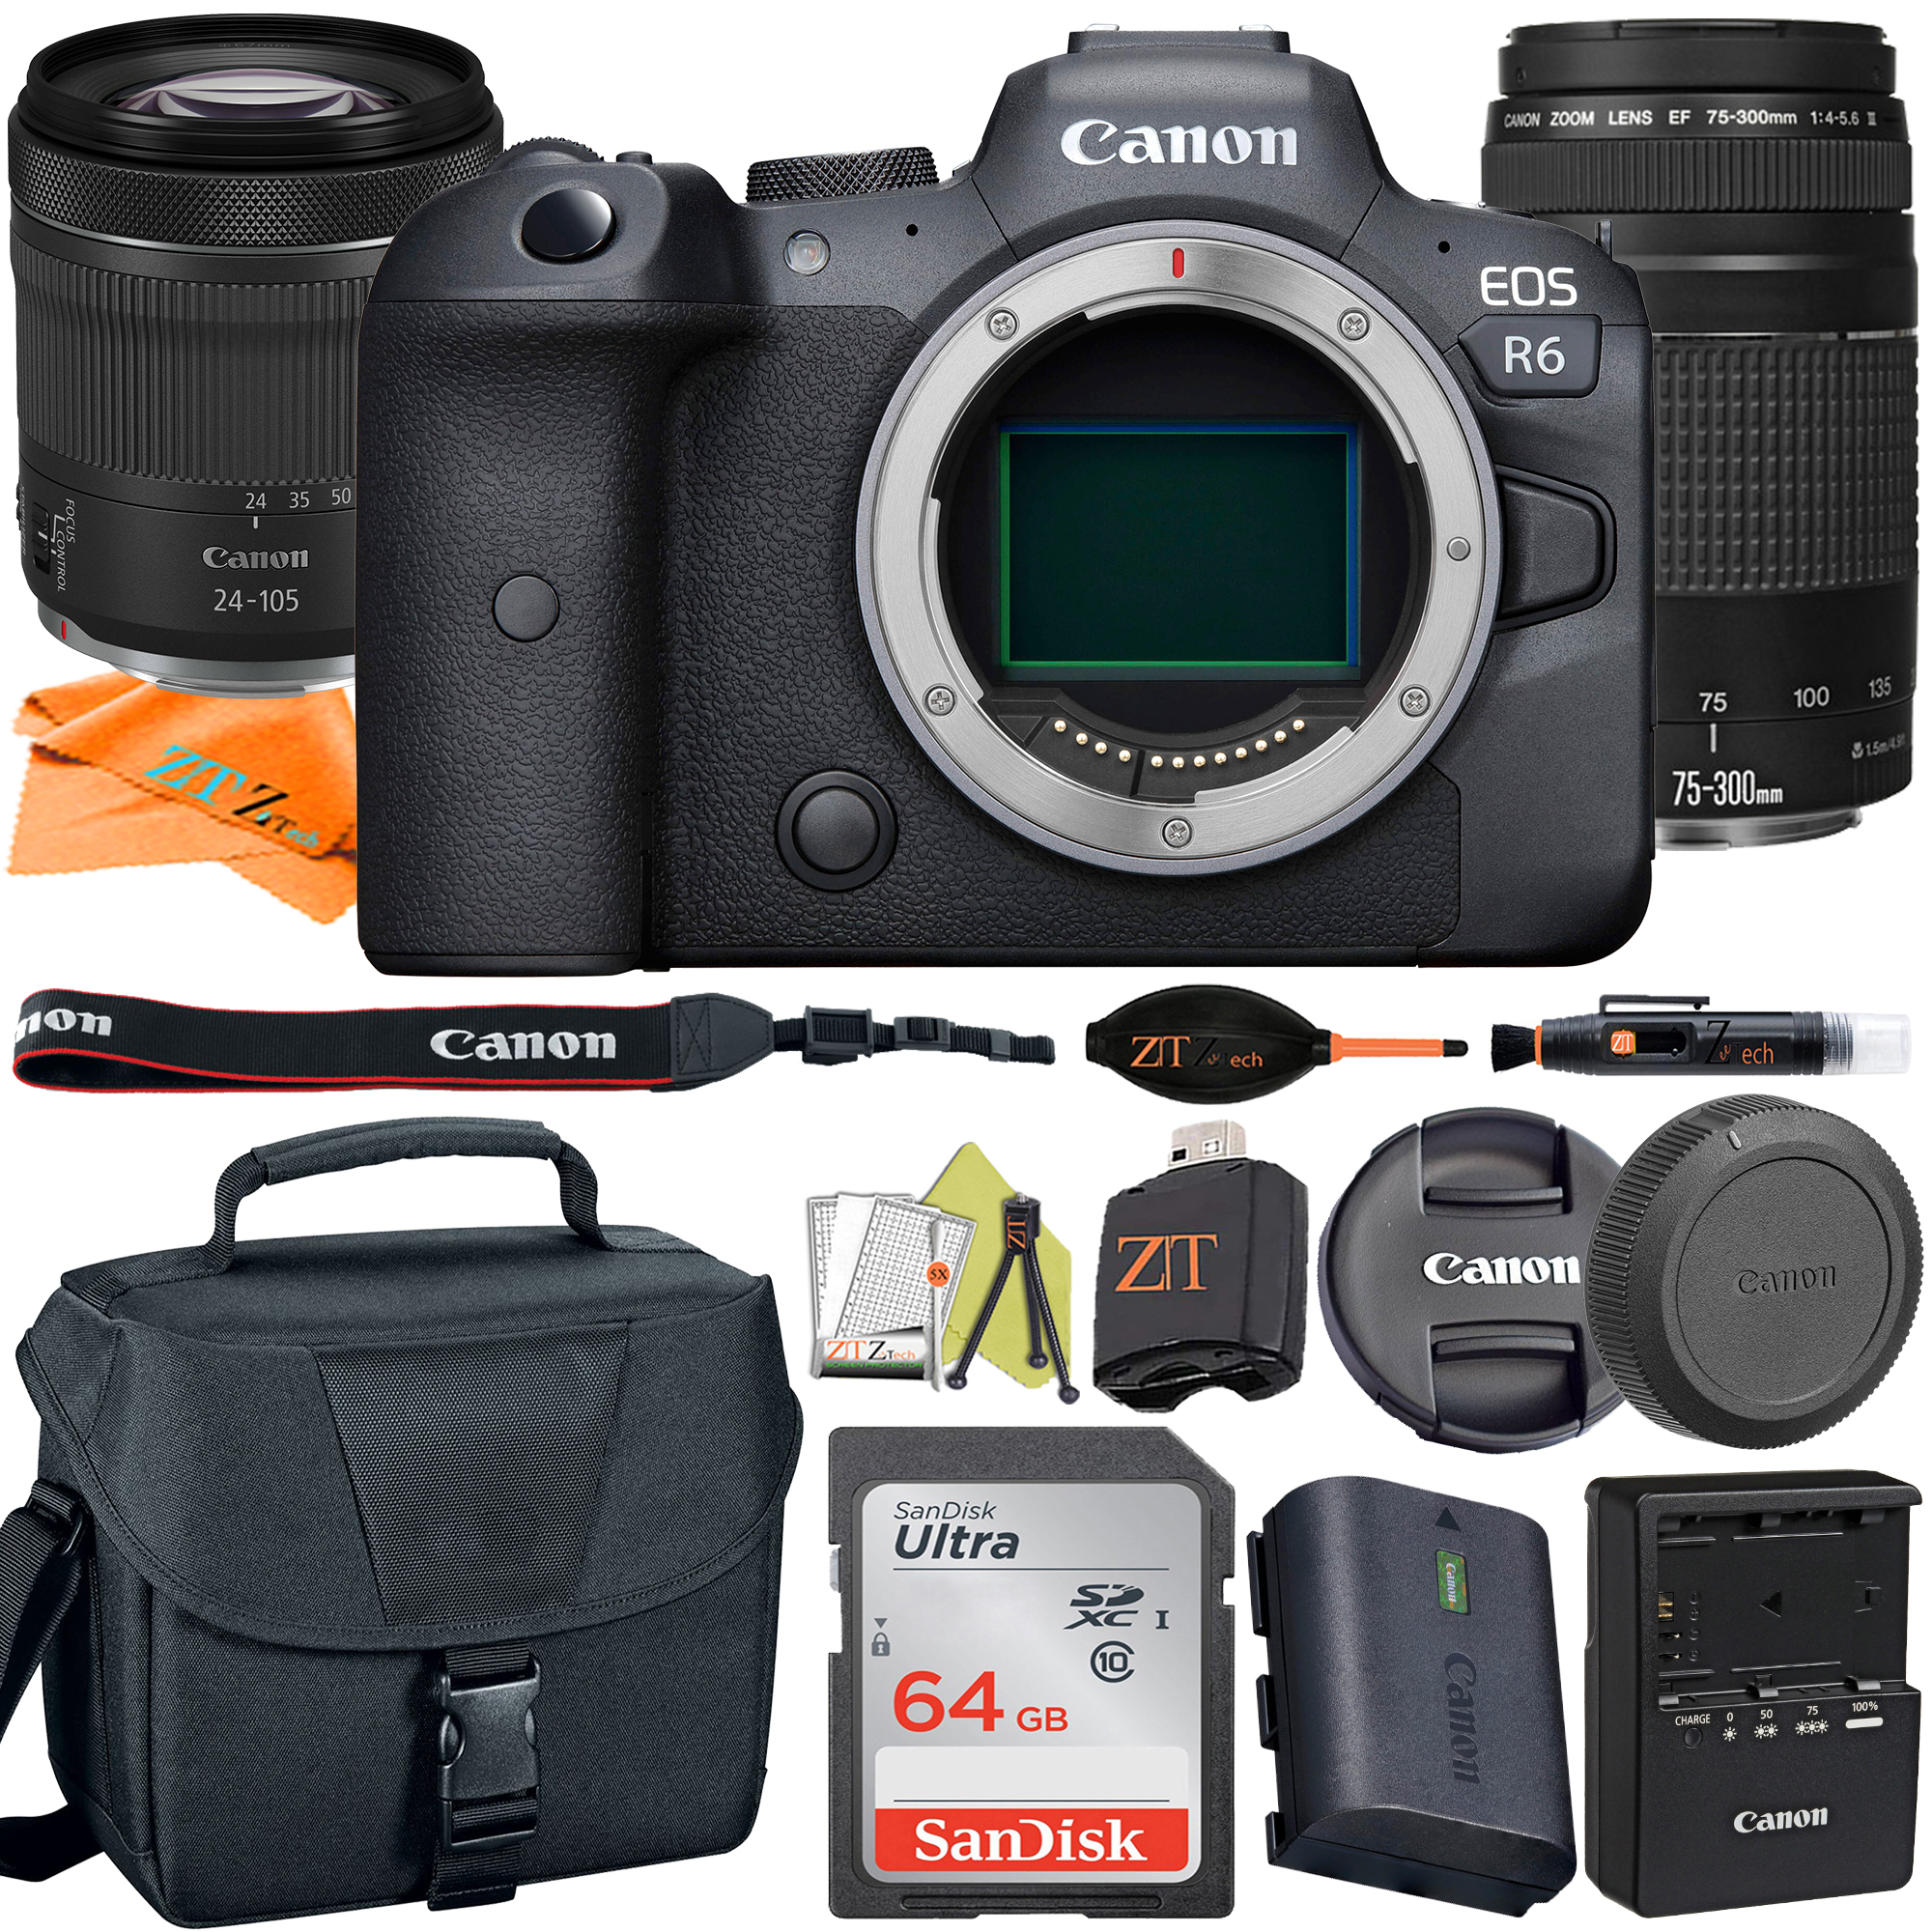 Canon EOS R6 Mirrorless Digital Camera with RF 24-105mm STM + 75-300mm Lens + SanDisk 64GB Card + Case + ZeeTech Accessory